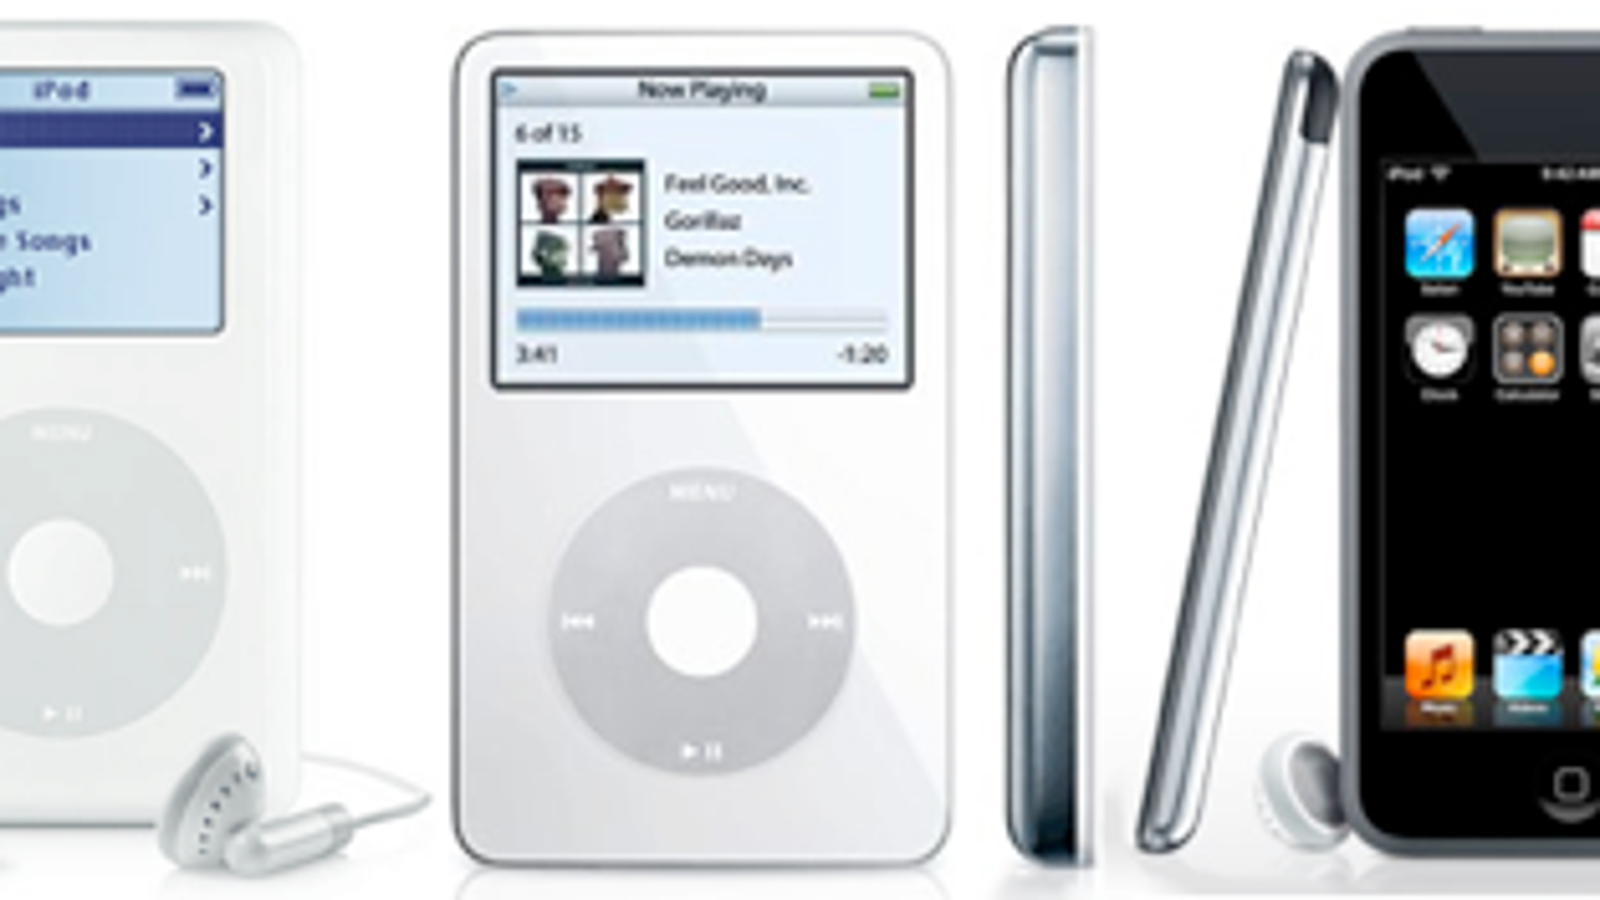 download the new version for ipod RoboTask 9.6.3.1123